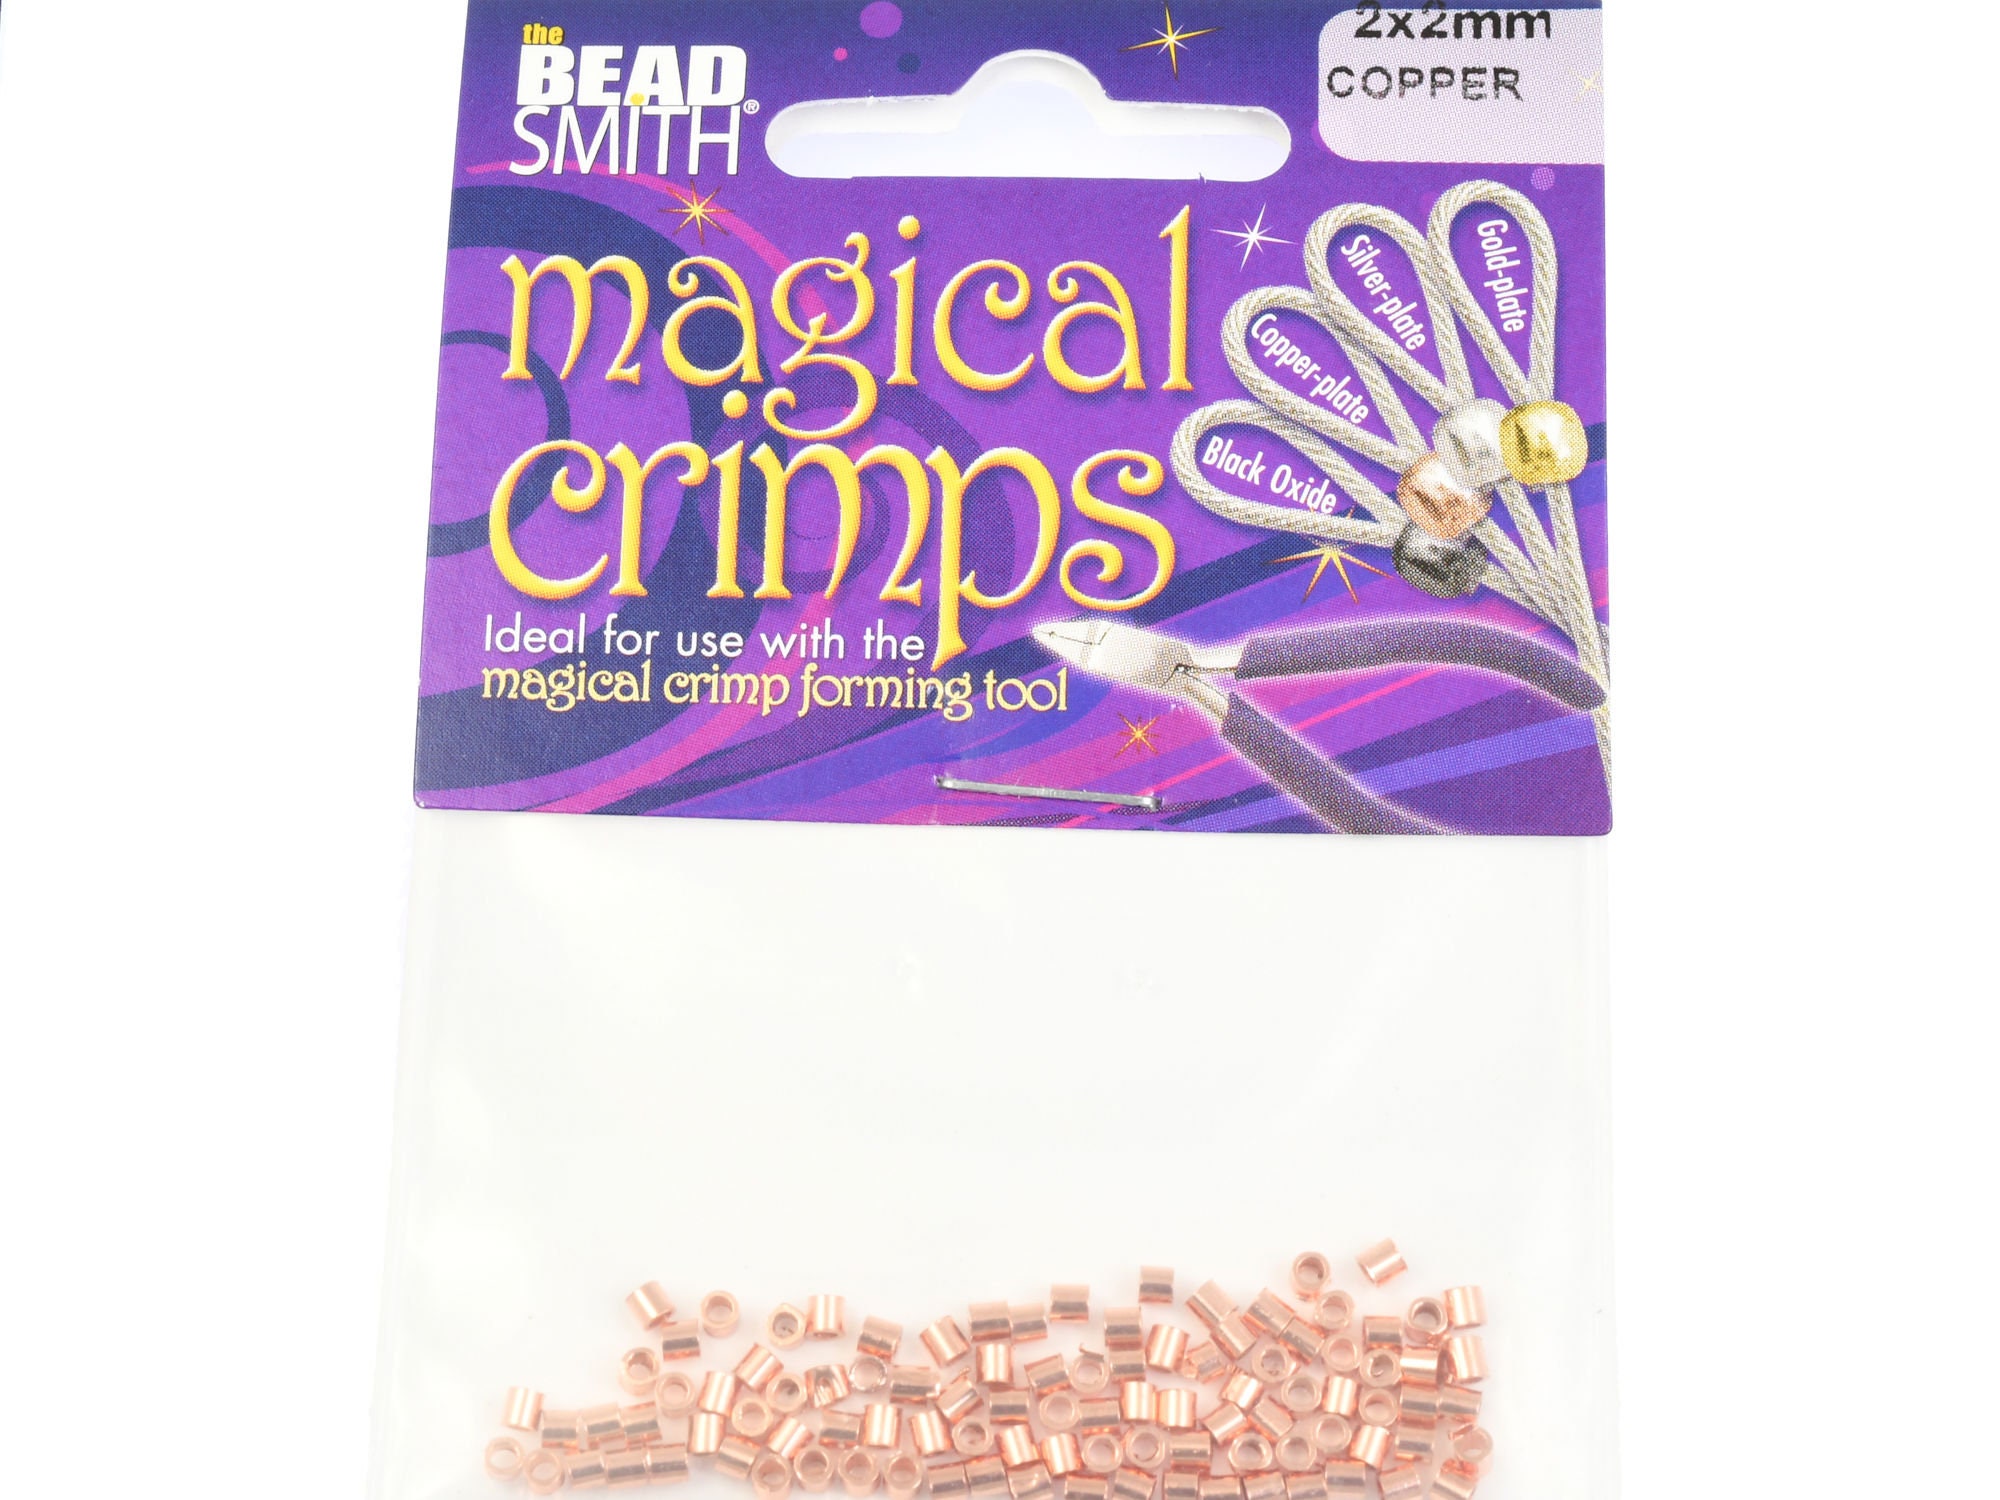 Beadsmith Magical Crimping Pliers